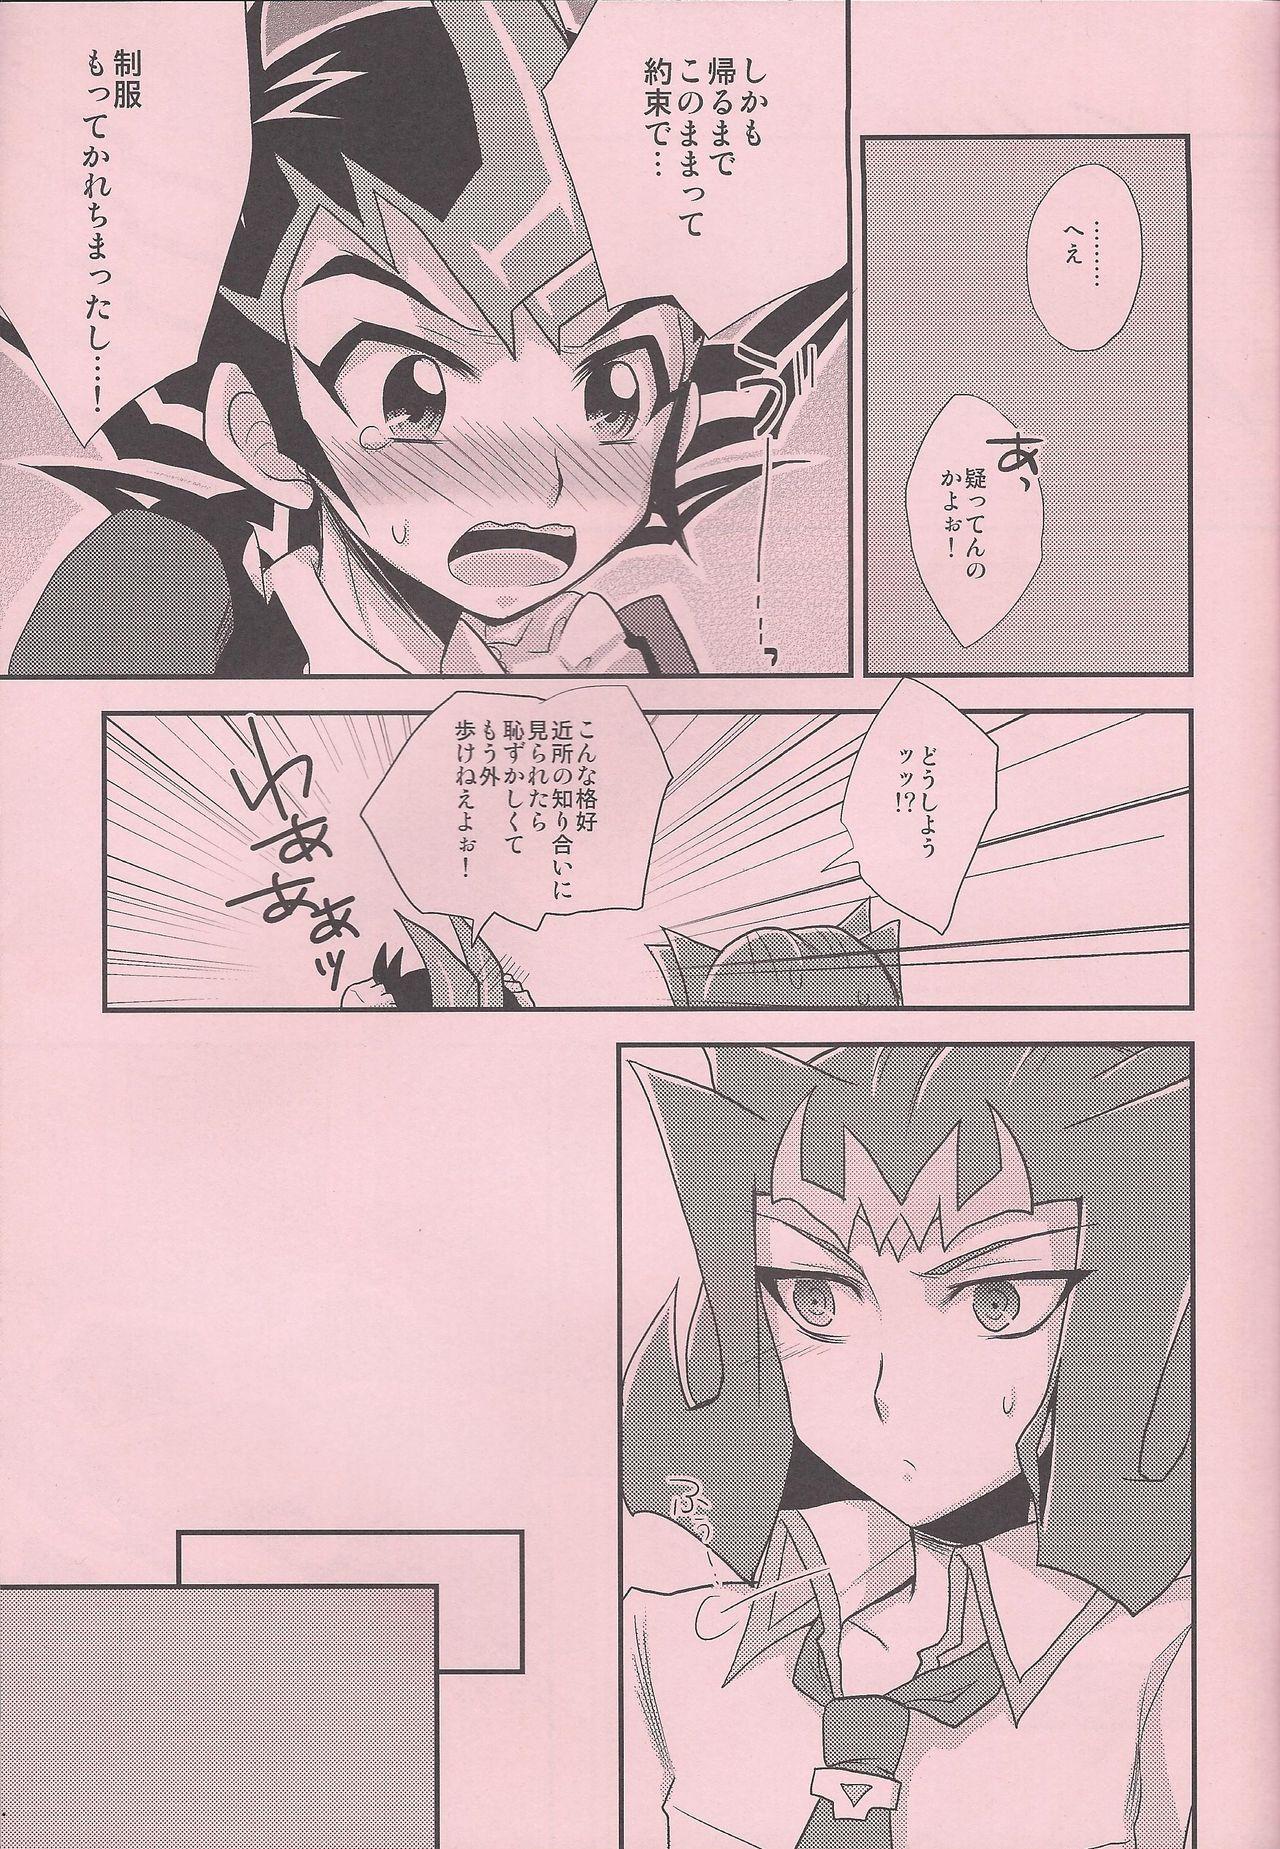 Super Hot Porn Maple Syrup - Yu gi oh zexal Massage Creep - Page 6